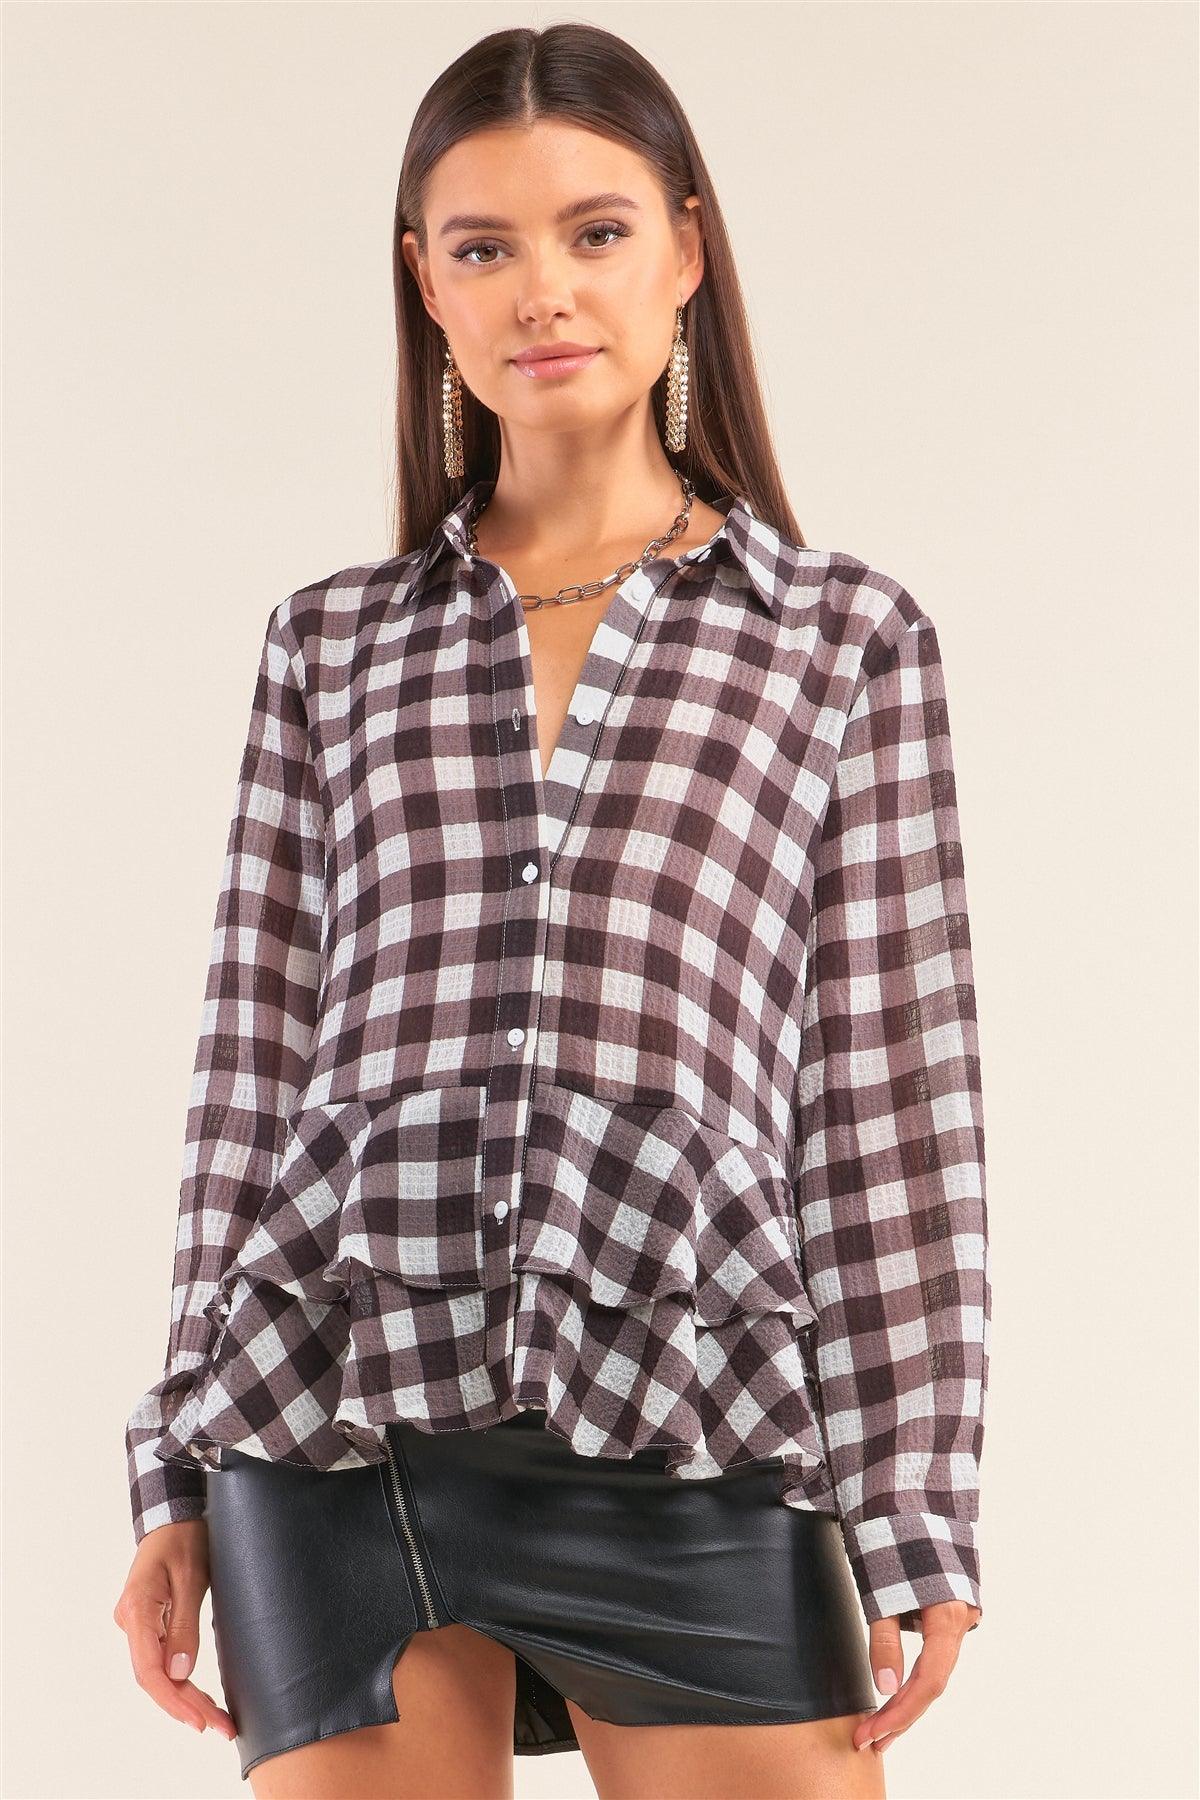 Back To School Black&White Checkered Crinkle Mesh Long Sleeve Collared Button Down Flare Hem Shirt /1-2-2-1